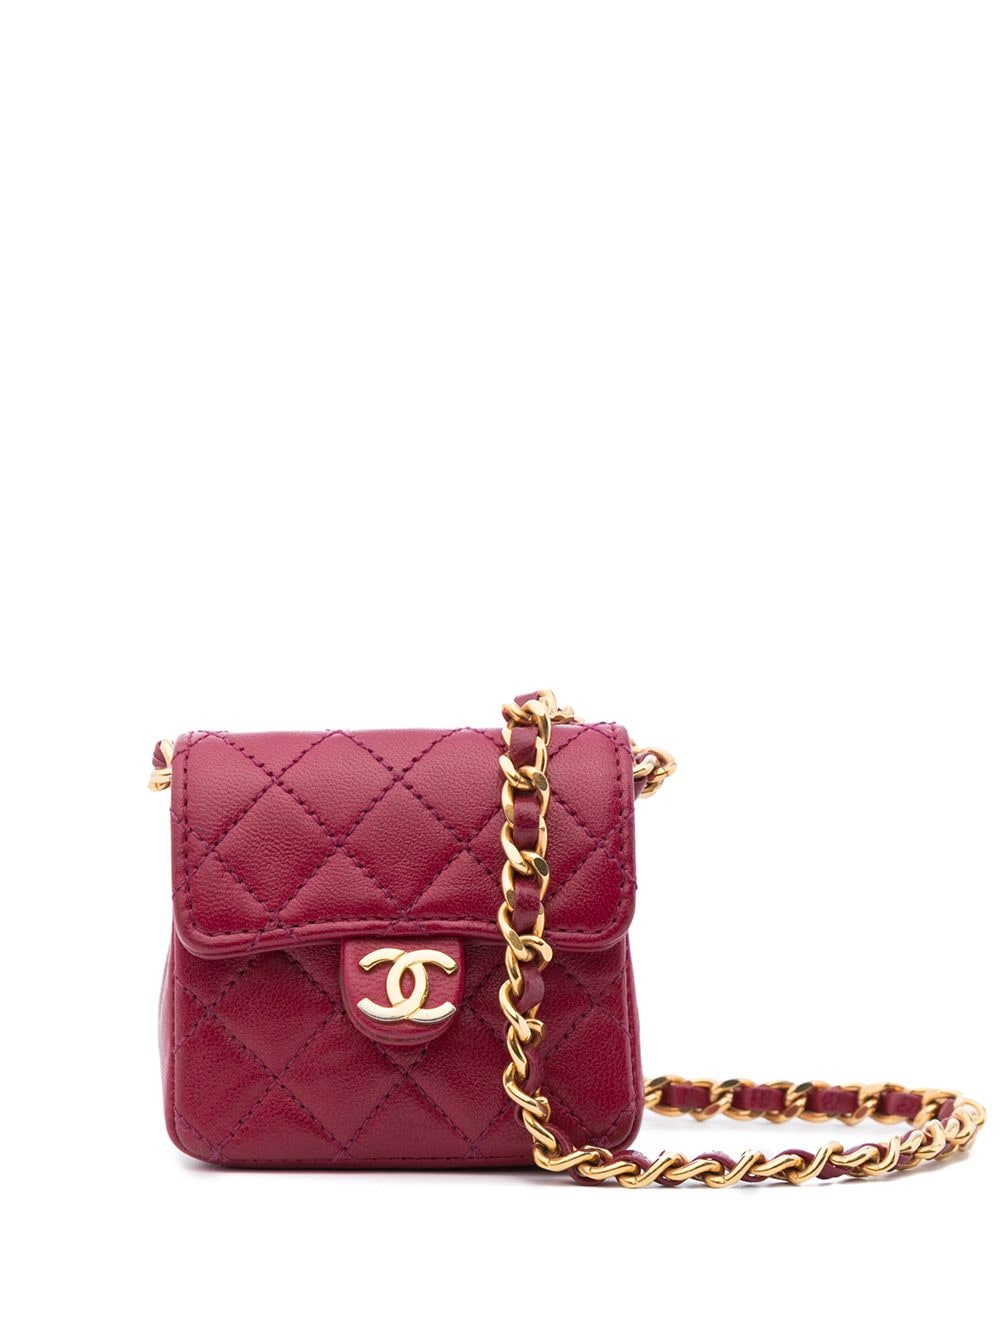 CHANEL Pre-Owned 1990 Classic Flap Micro Shoulder Bag - Farfetch